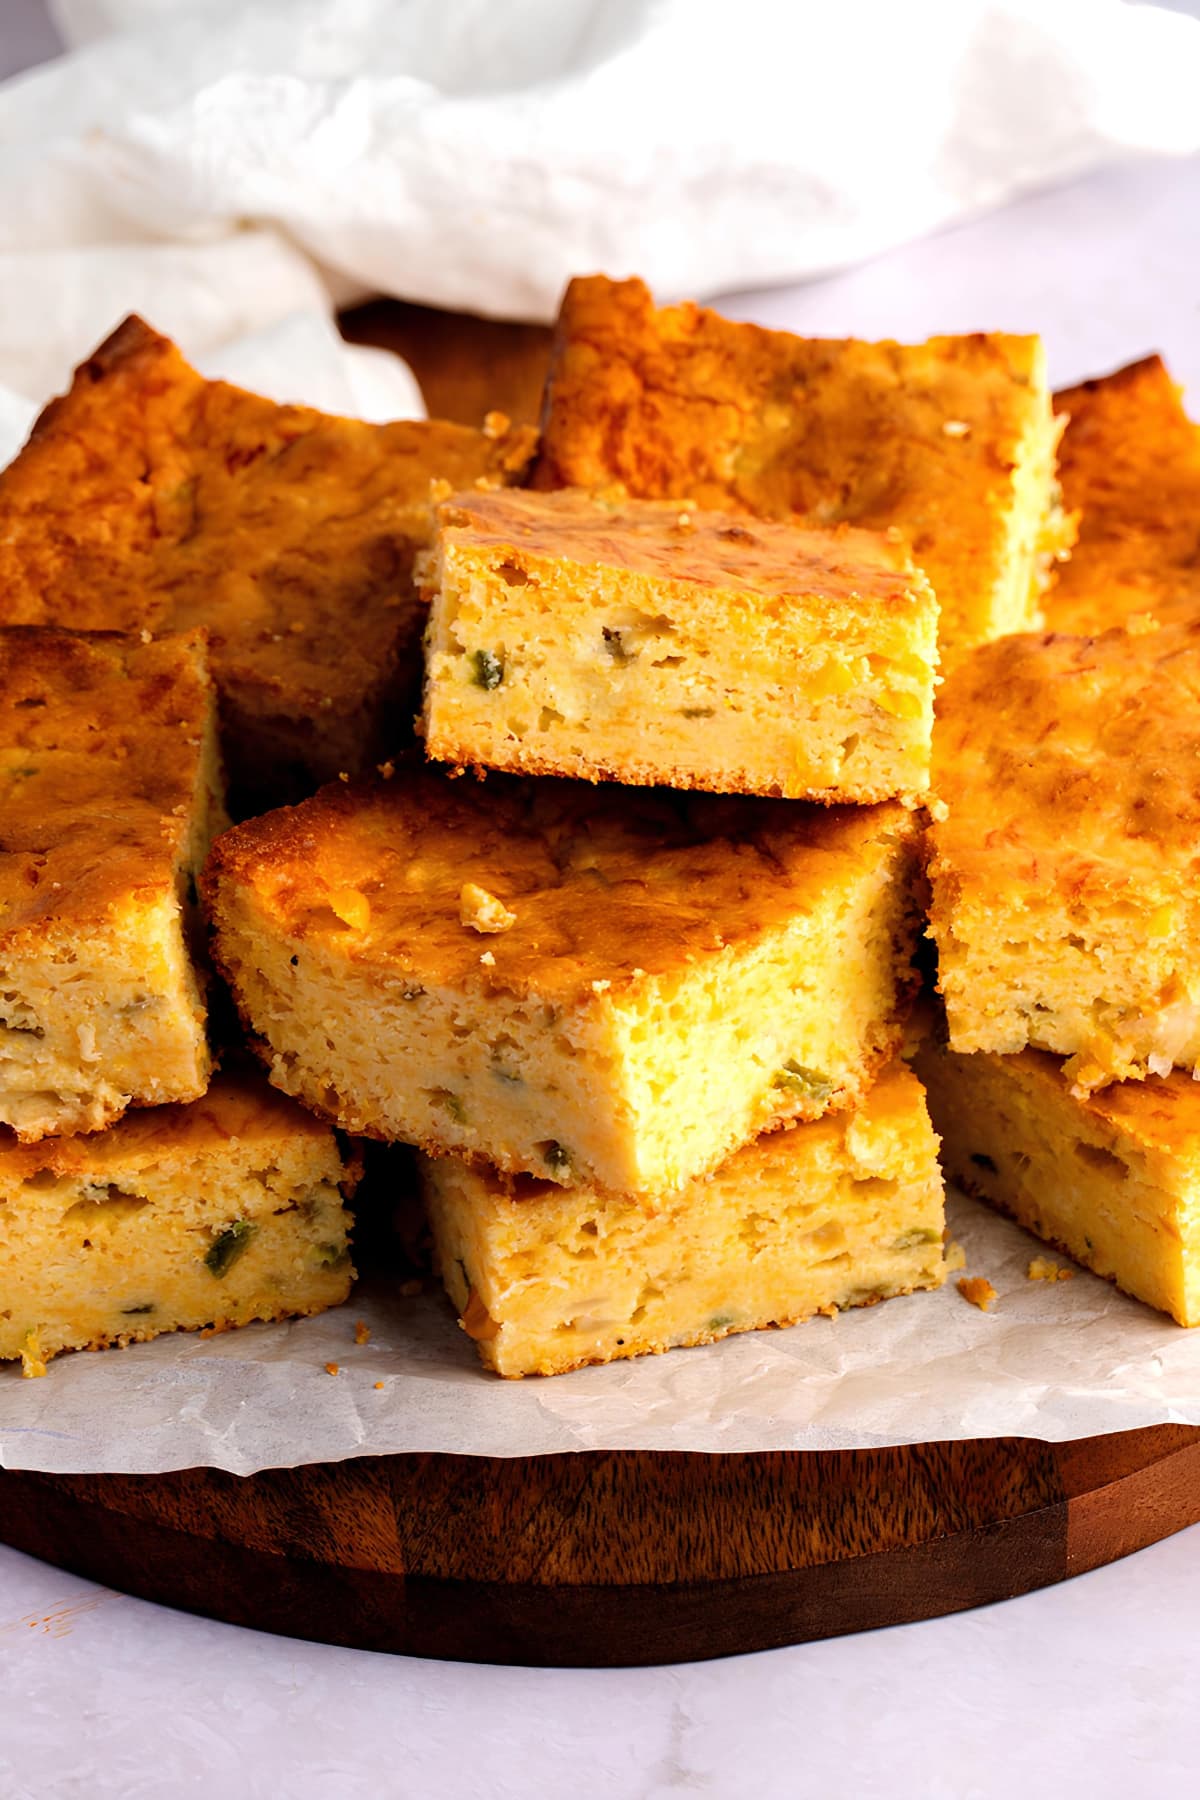 Homemade Mexican Cornbread with Jalapeno and Jiffy Mix